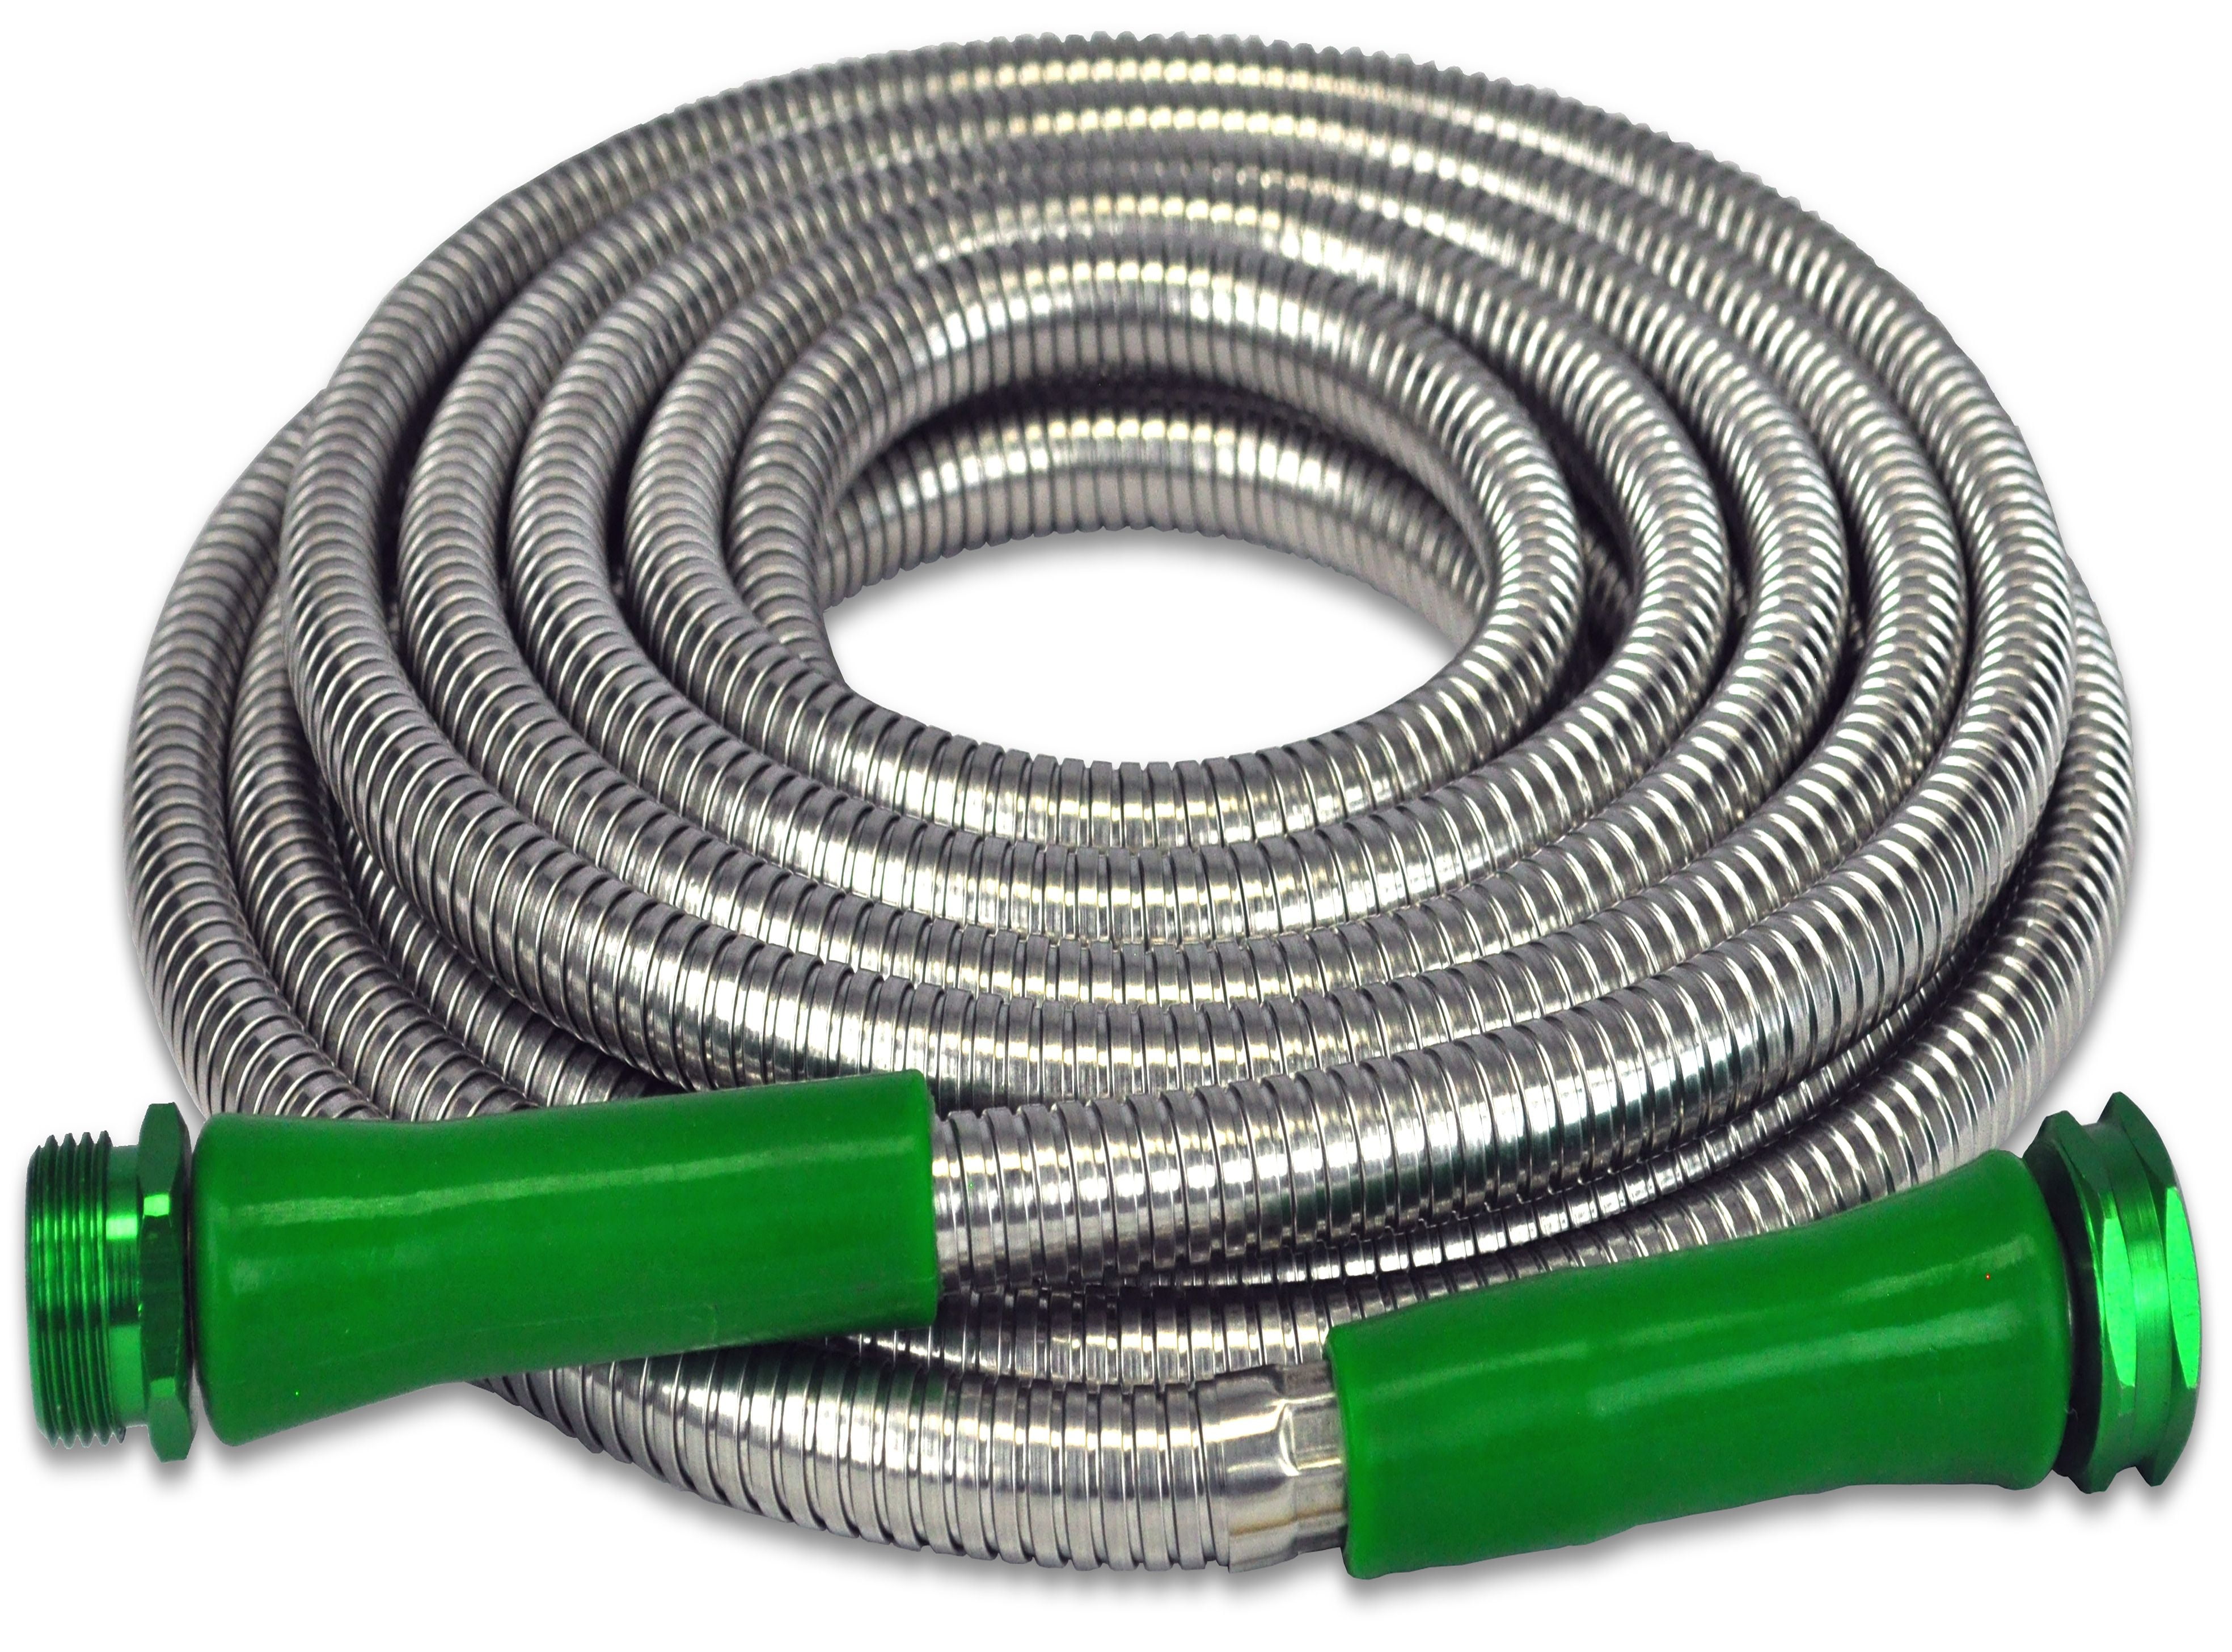 The Top 5 Properties of Stainless Steel Hoses